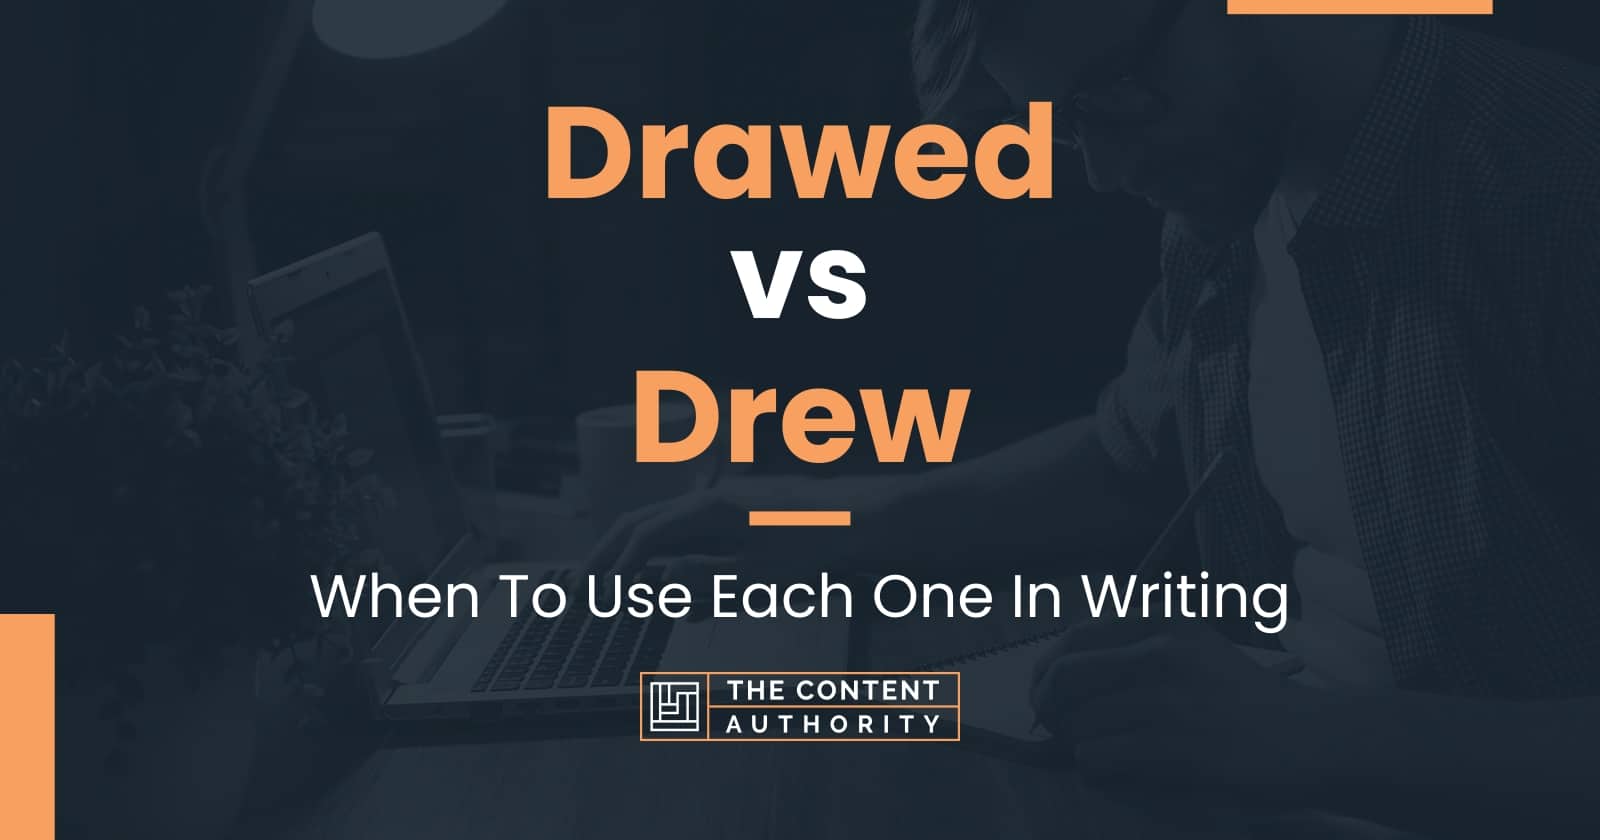 Drawed vs Drew When To Use Each One In Writing